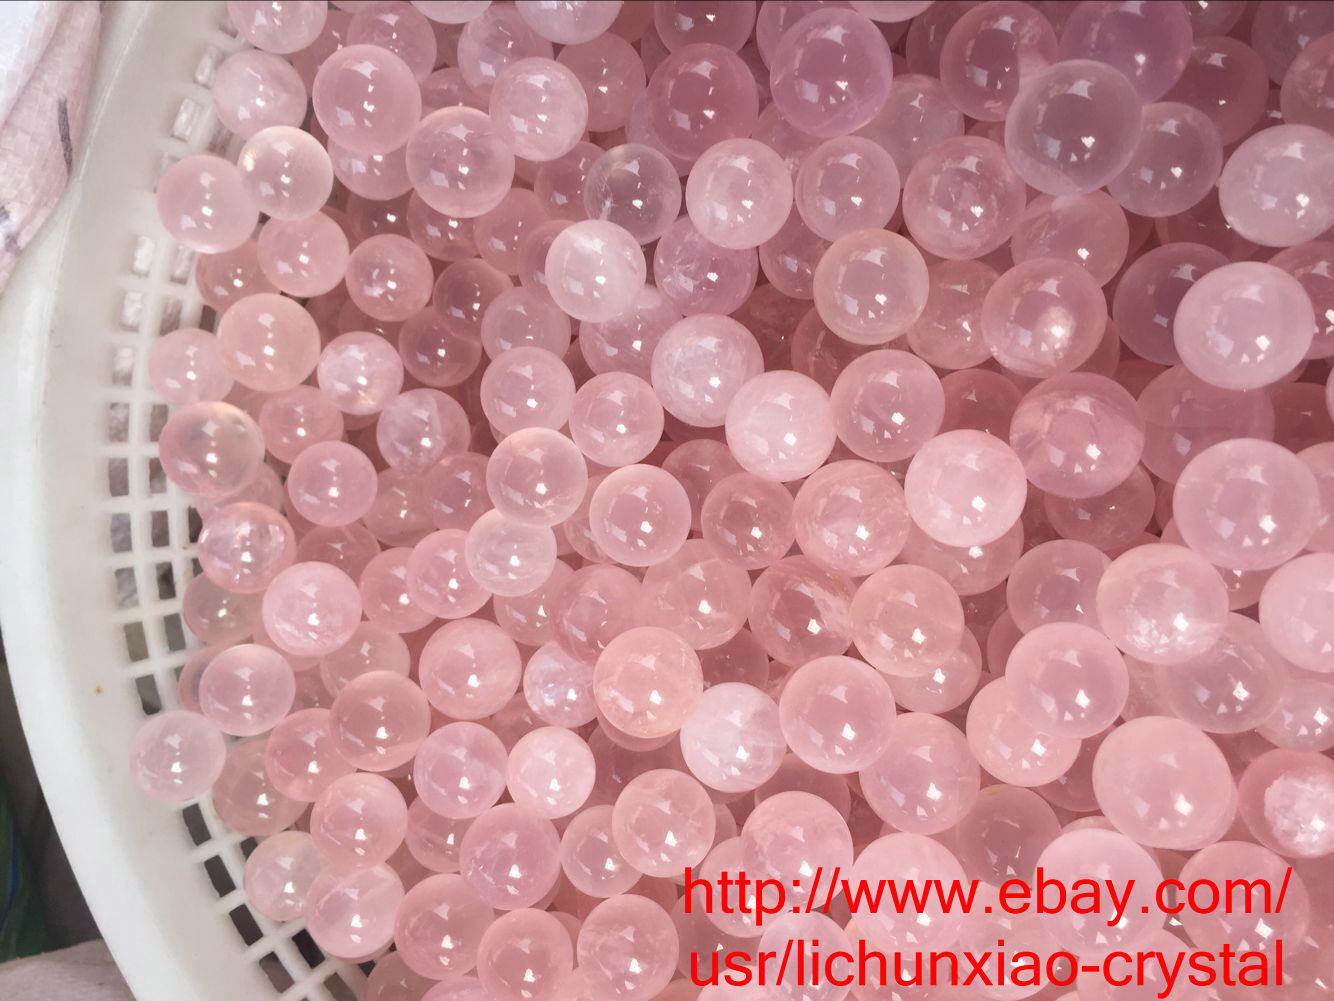 4.4lb wholesale Natural Mozambique ICY Rose Quartz Crystal Sphere Ball Healing